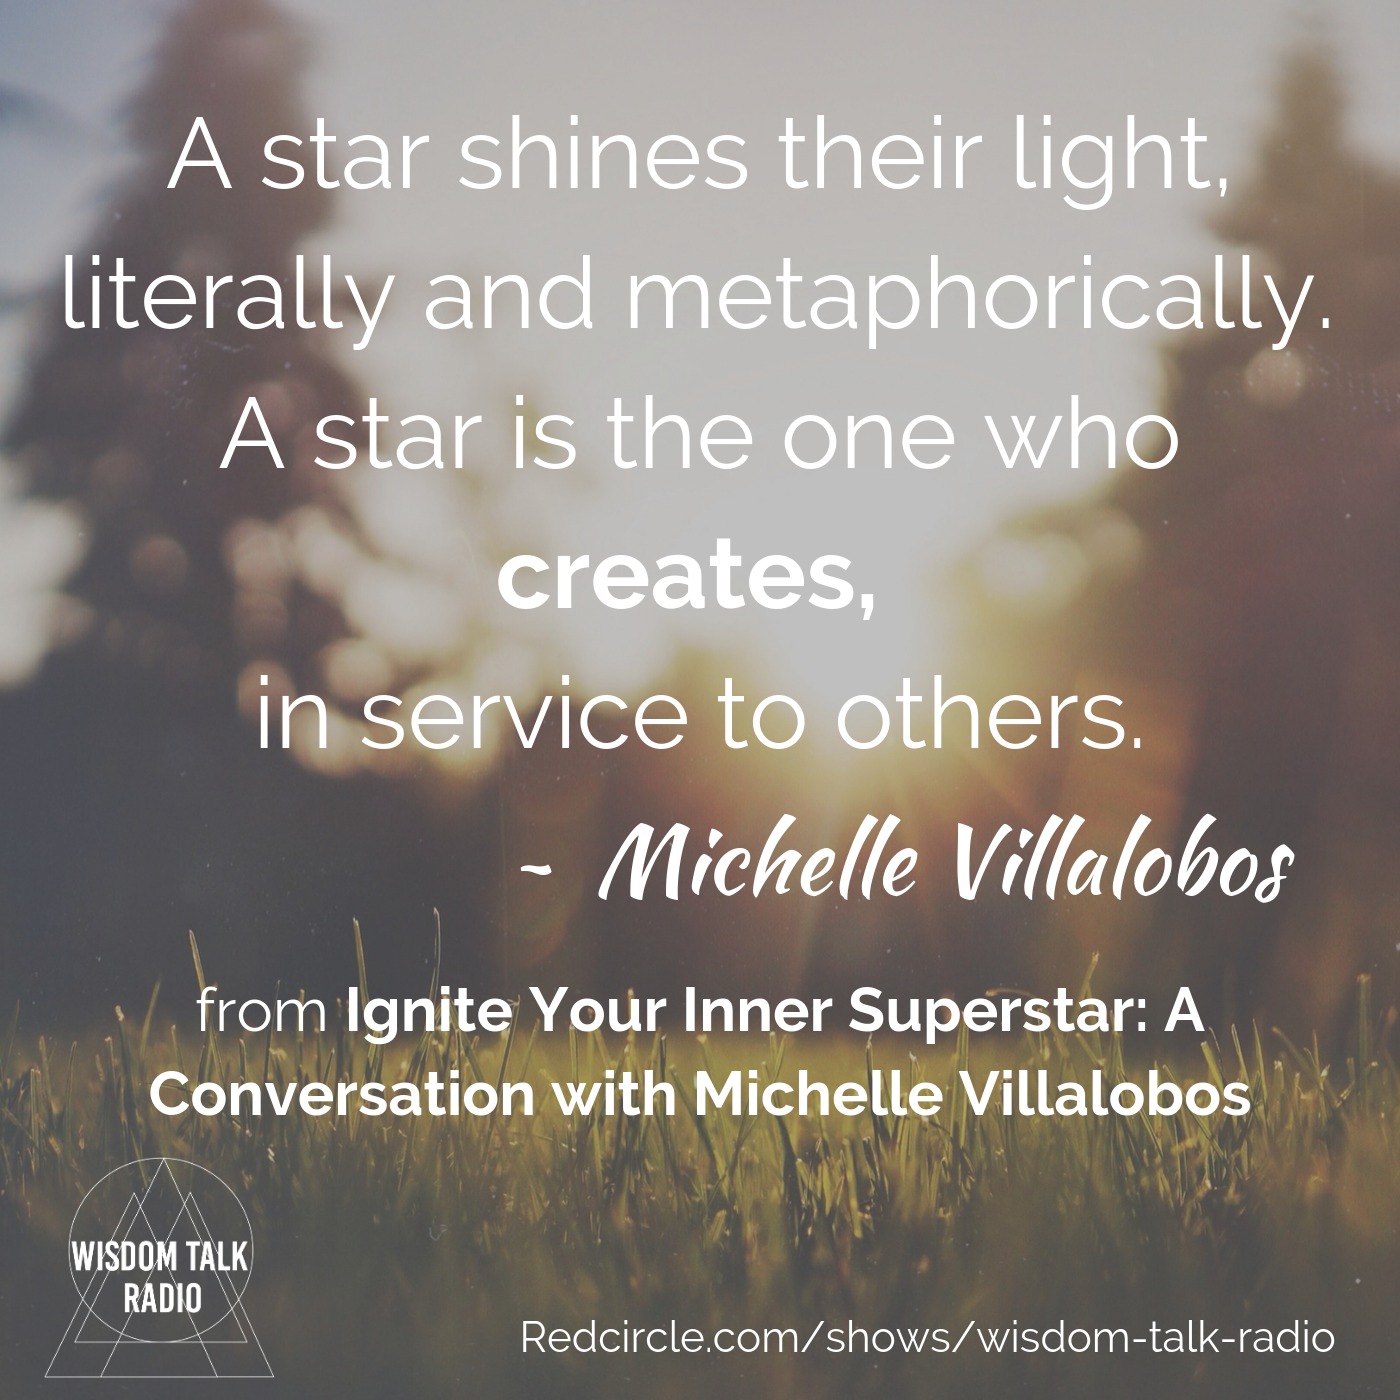 Ignite Your Inner Superstar: A Conversation with Michelle Villalobos